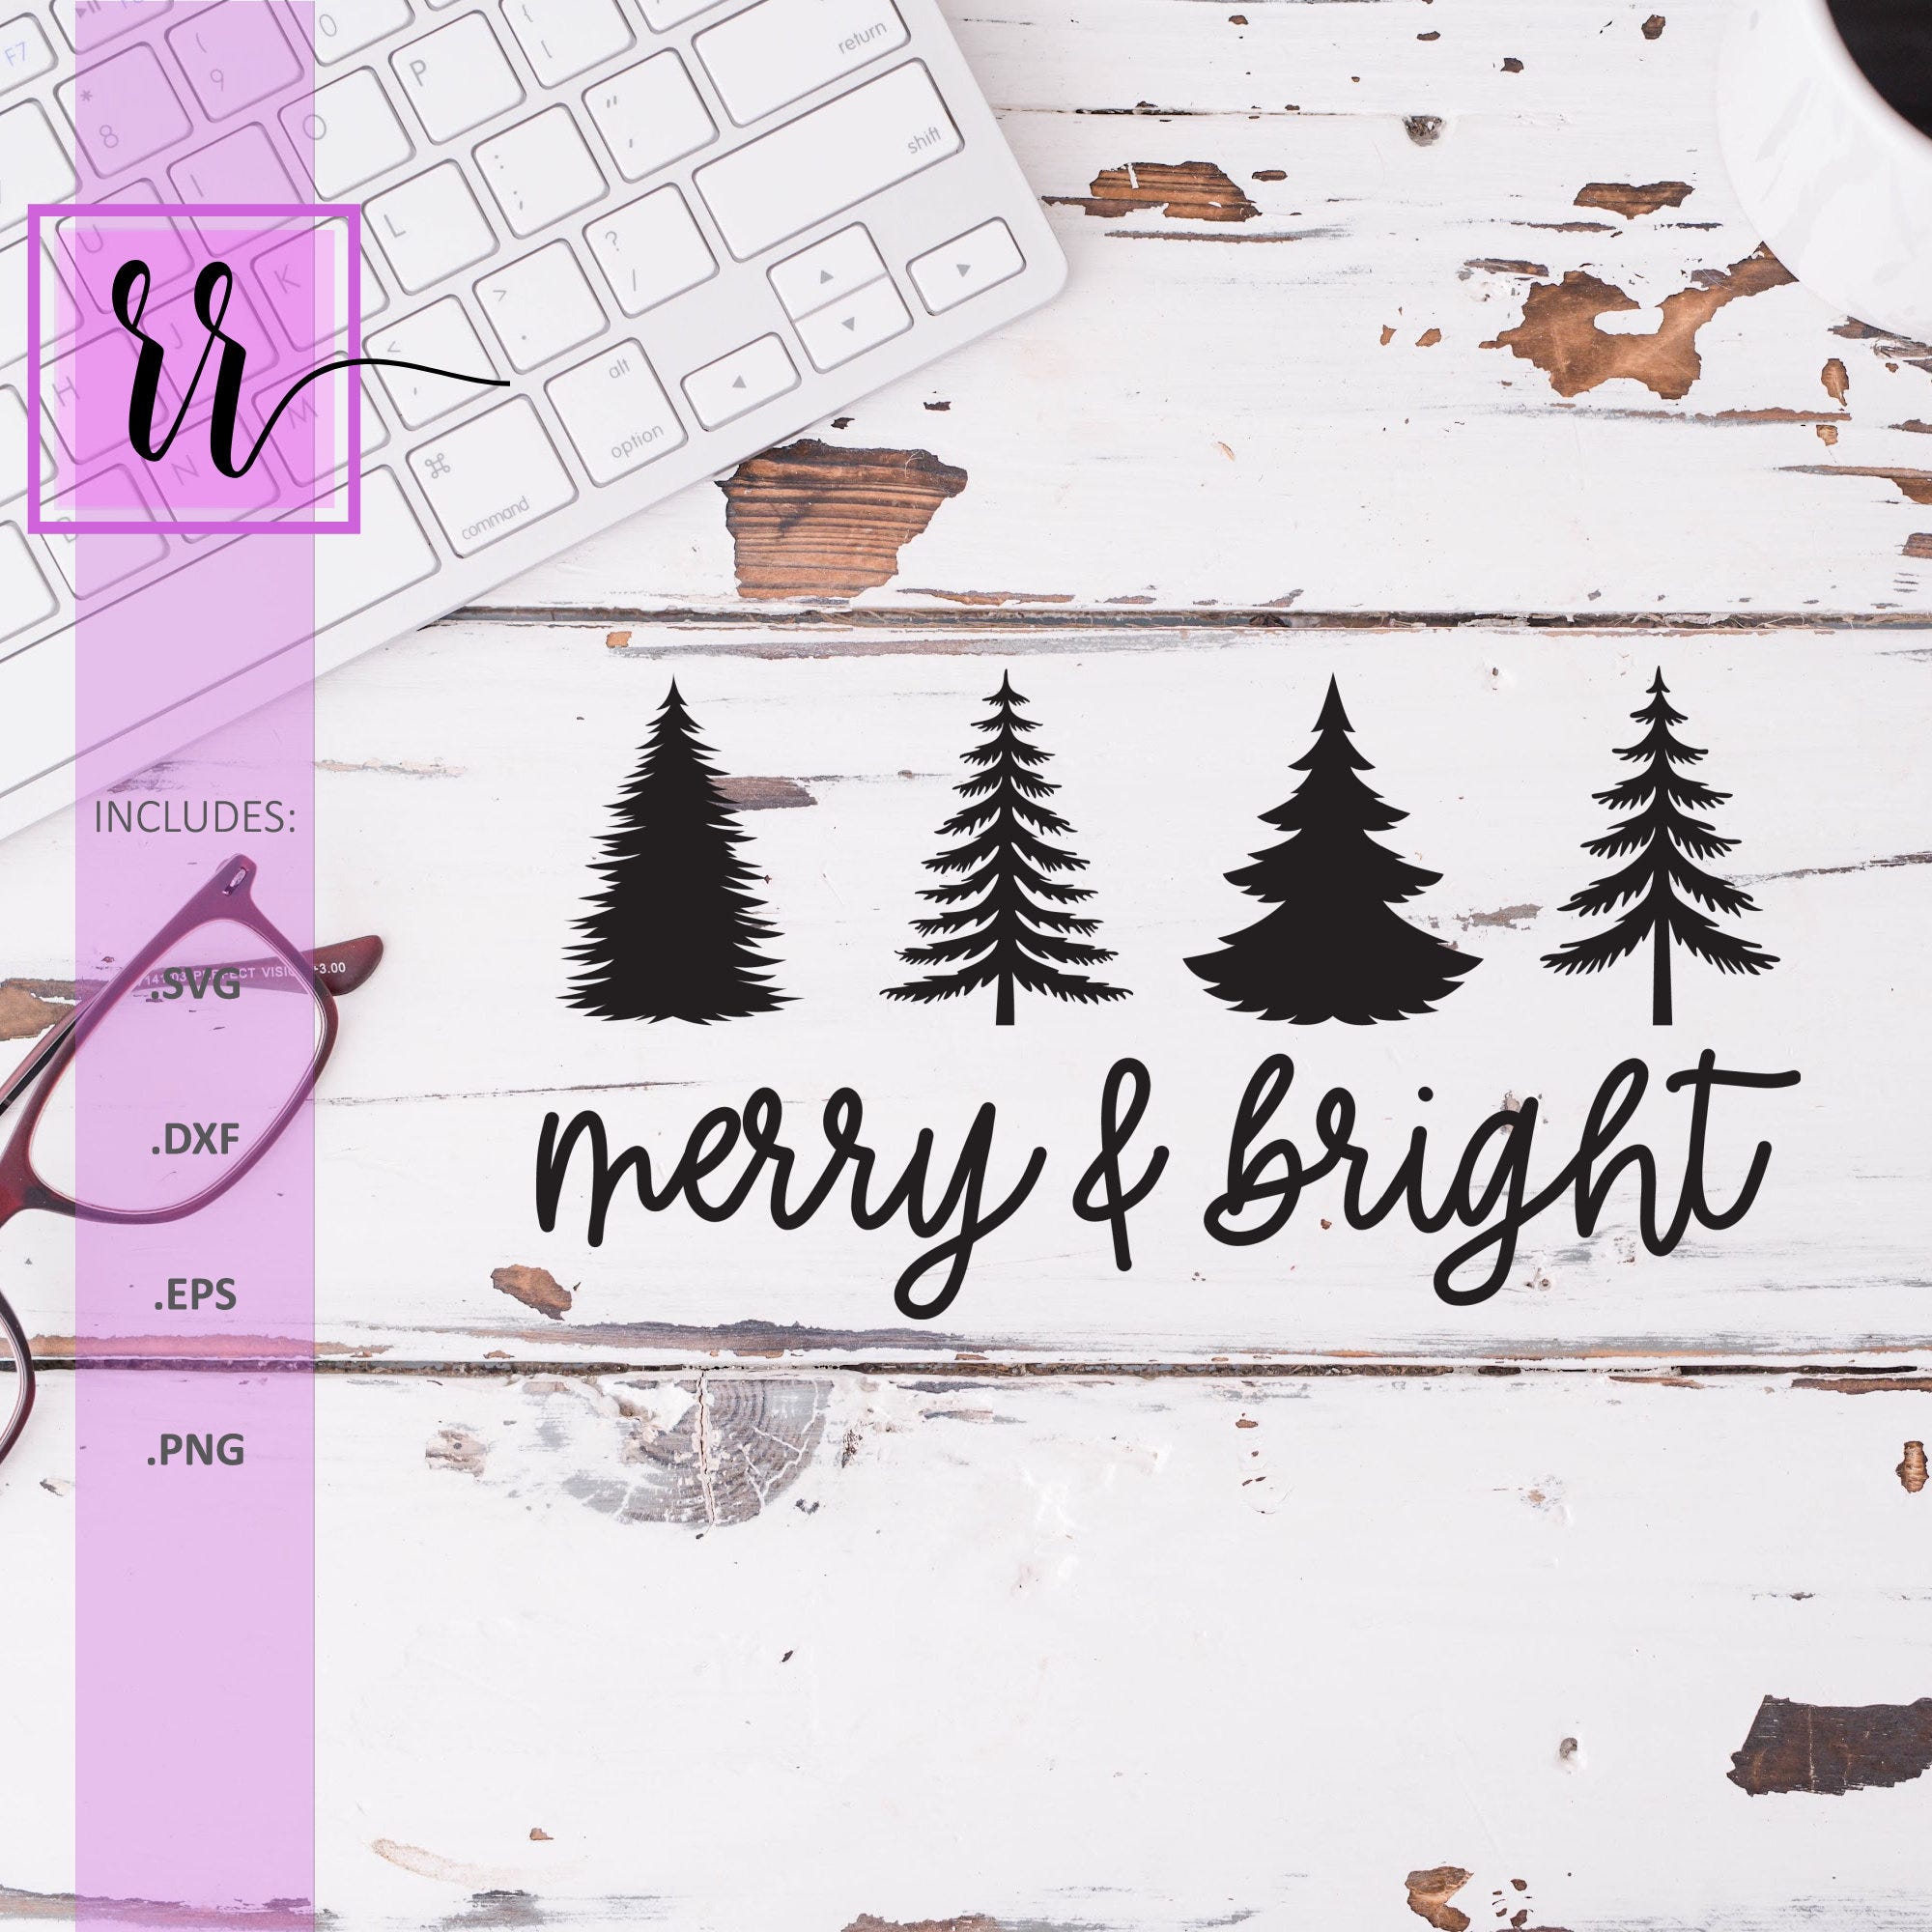 Merry & Bright SVG | Christmas Tree SVG | Christmas Quote SVG | Holiday Craft ideas | png File | Glowforge | Cricut | Silhouette | Cut Files